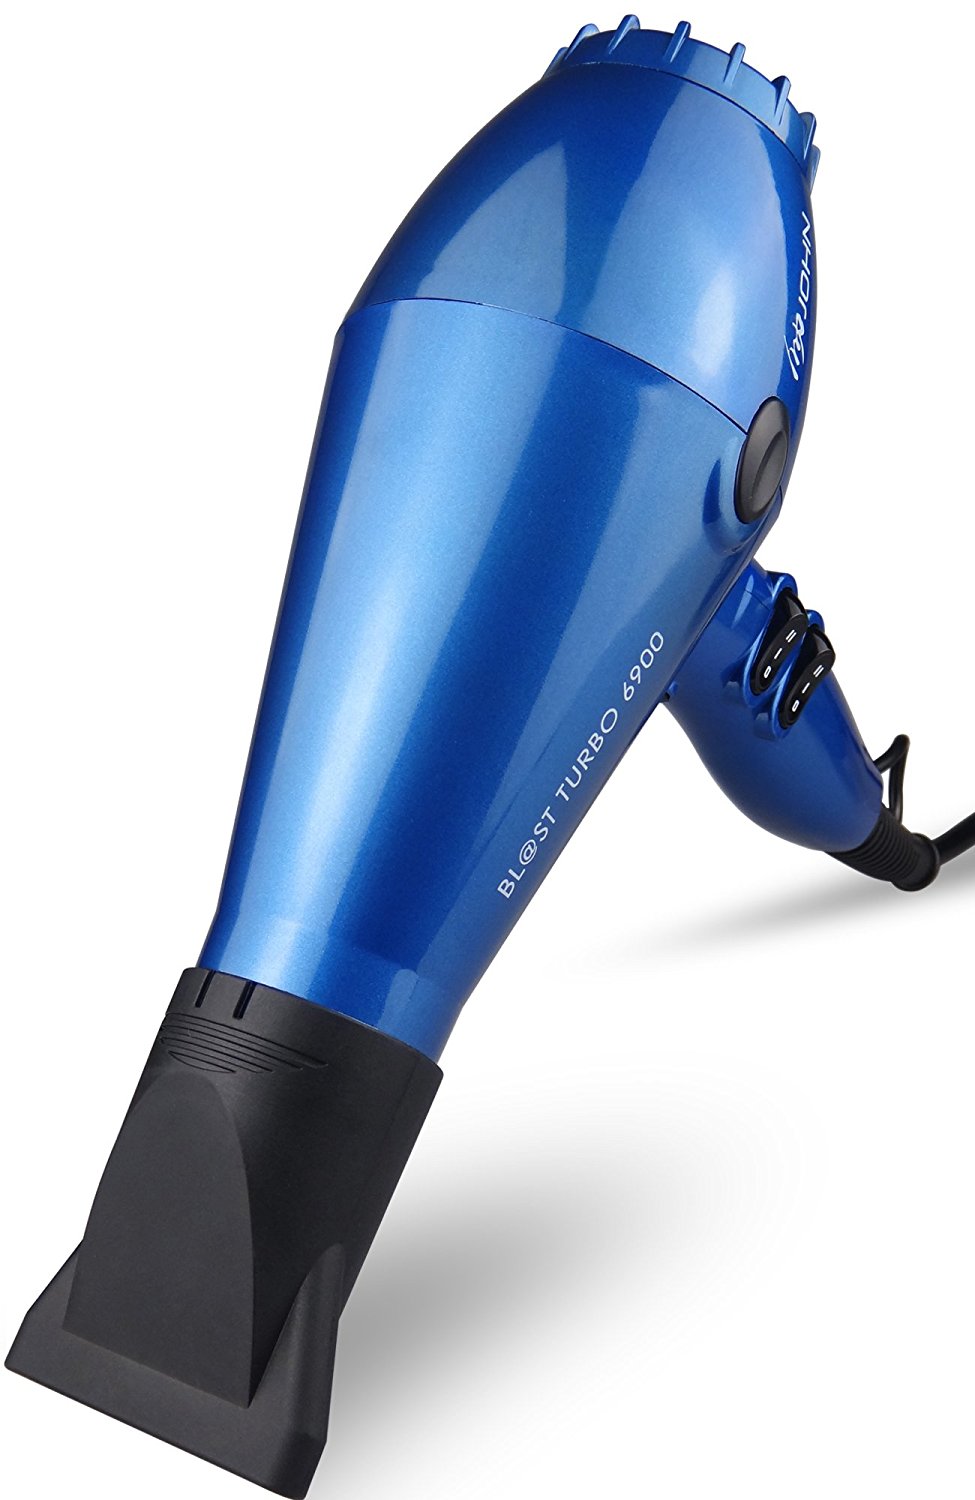 JOHN Blast 6900 Tourmaline Ceramic Ionic Professional Hair Dryer 2200W Powerful Fast Drying Blow Dryer 9Ft Cable AC Motor with 2 Nozzles for Salon Styling Glossy Blue